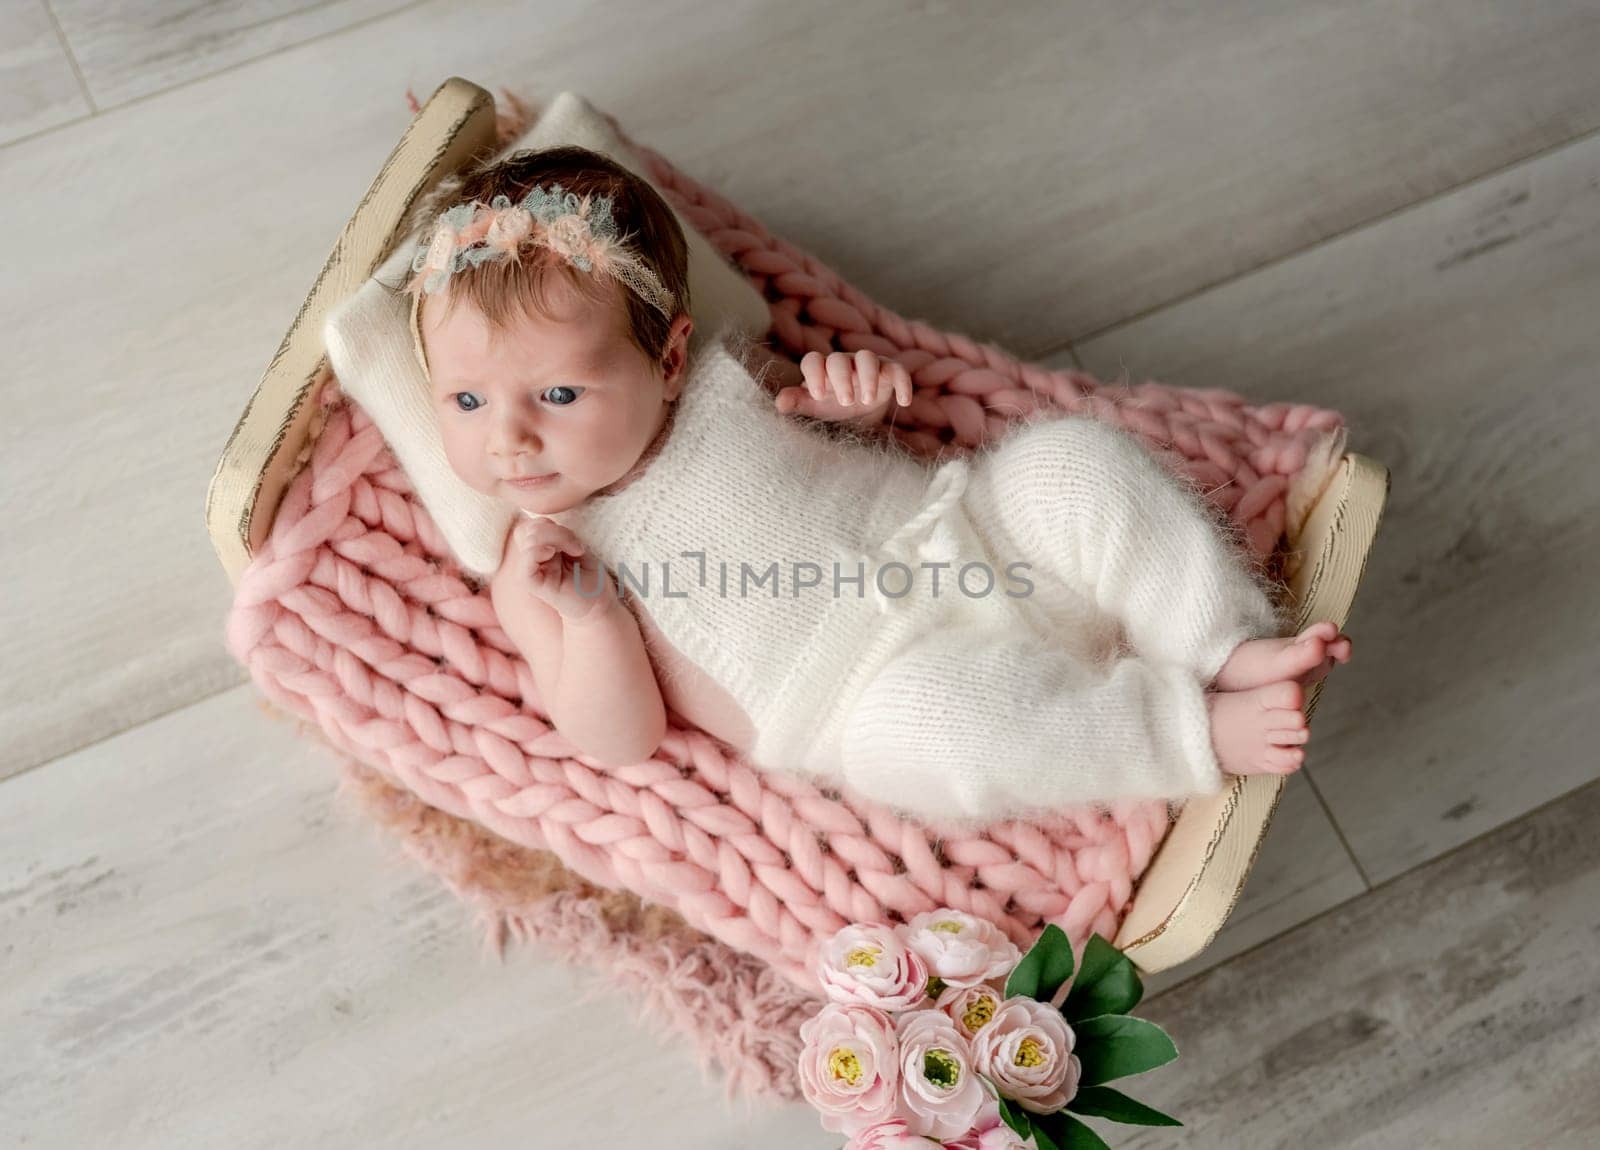 Adorable newborn baby girl lying in tiny bed on fur portrait. Cute infant child kid swaddled in fabric resting in room with daylight